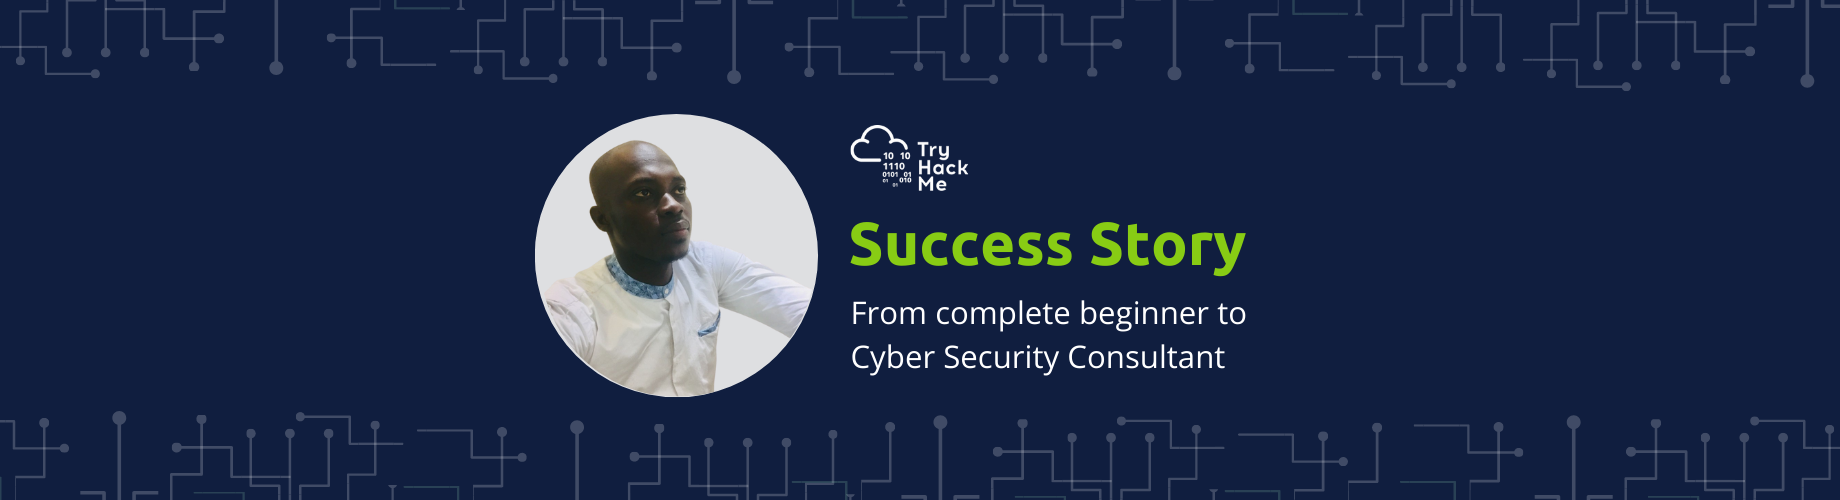 From Complete Beginner to Cyber Security Consultant - How TryHackMe Helped Tepi Launch Into Cyber